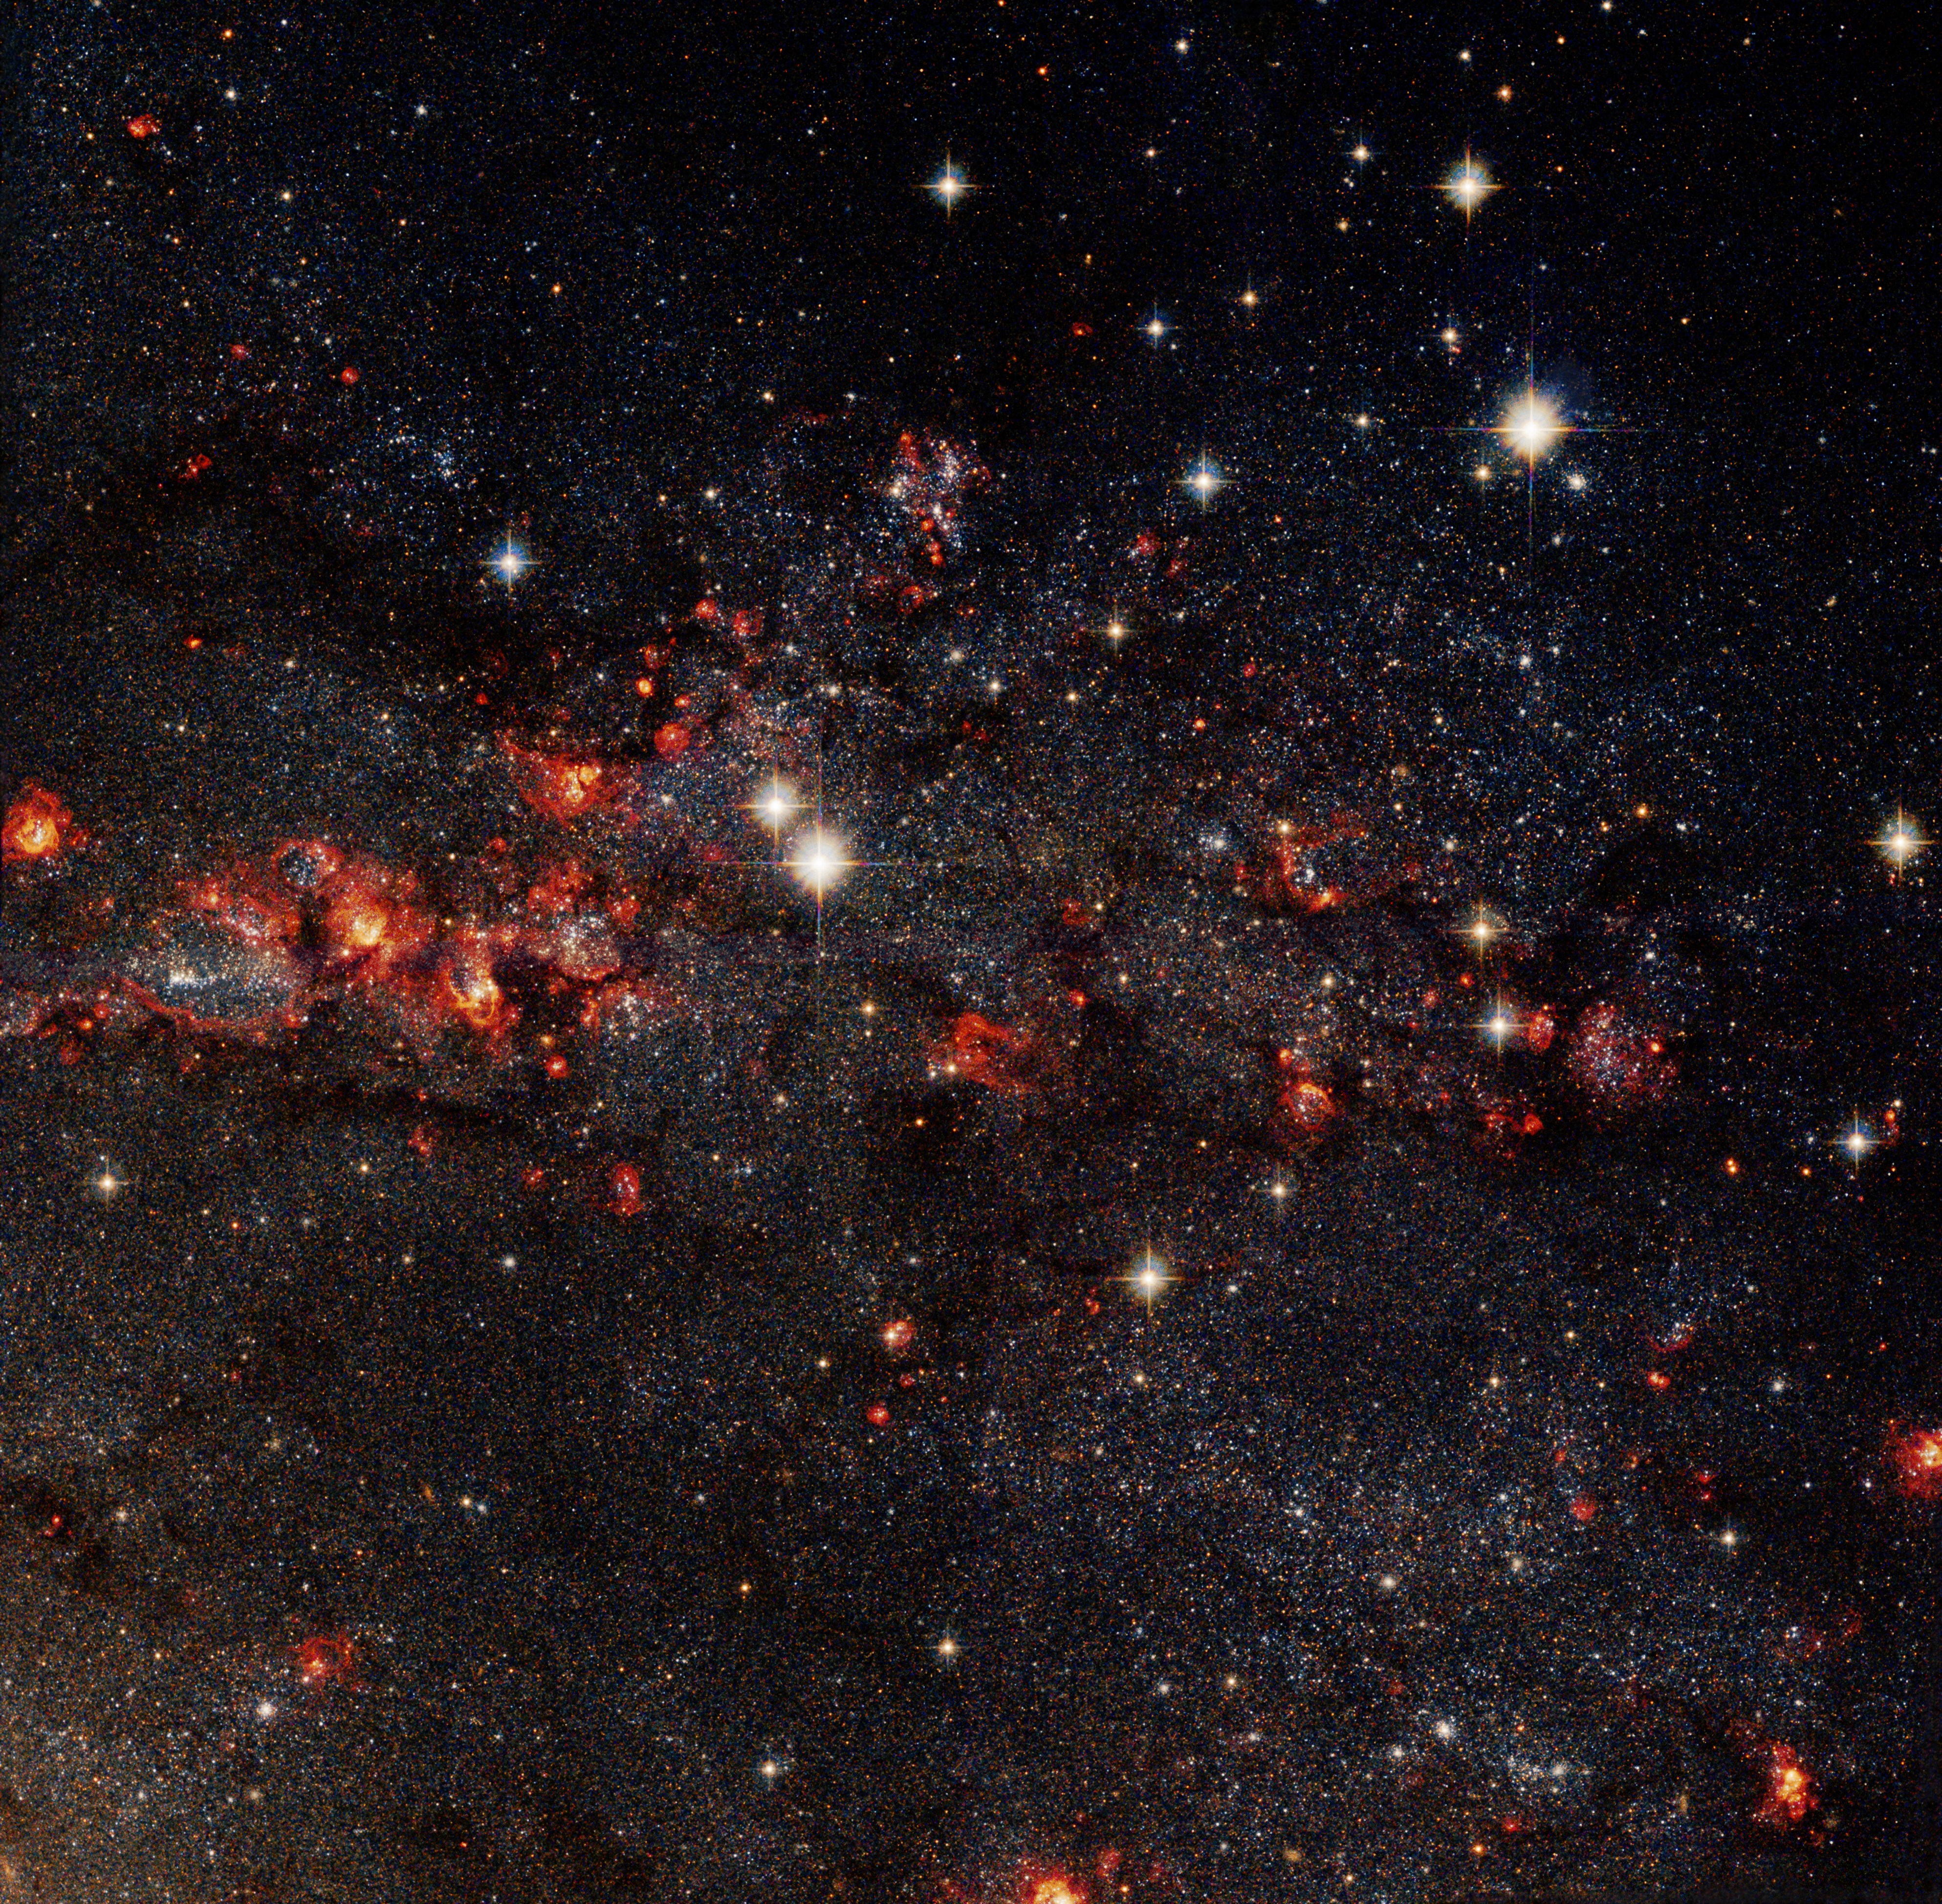 On the left side of the image is a spiral galaxy, on the right the inset shows a zoom in with dark red stars and dust and gas.